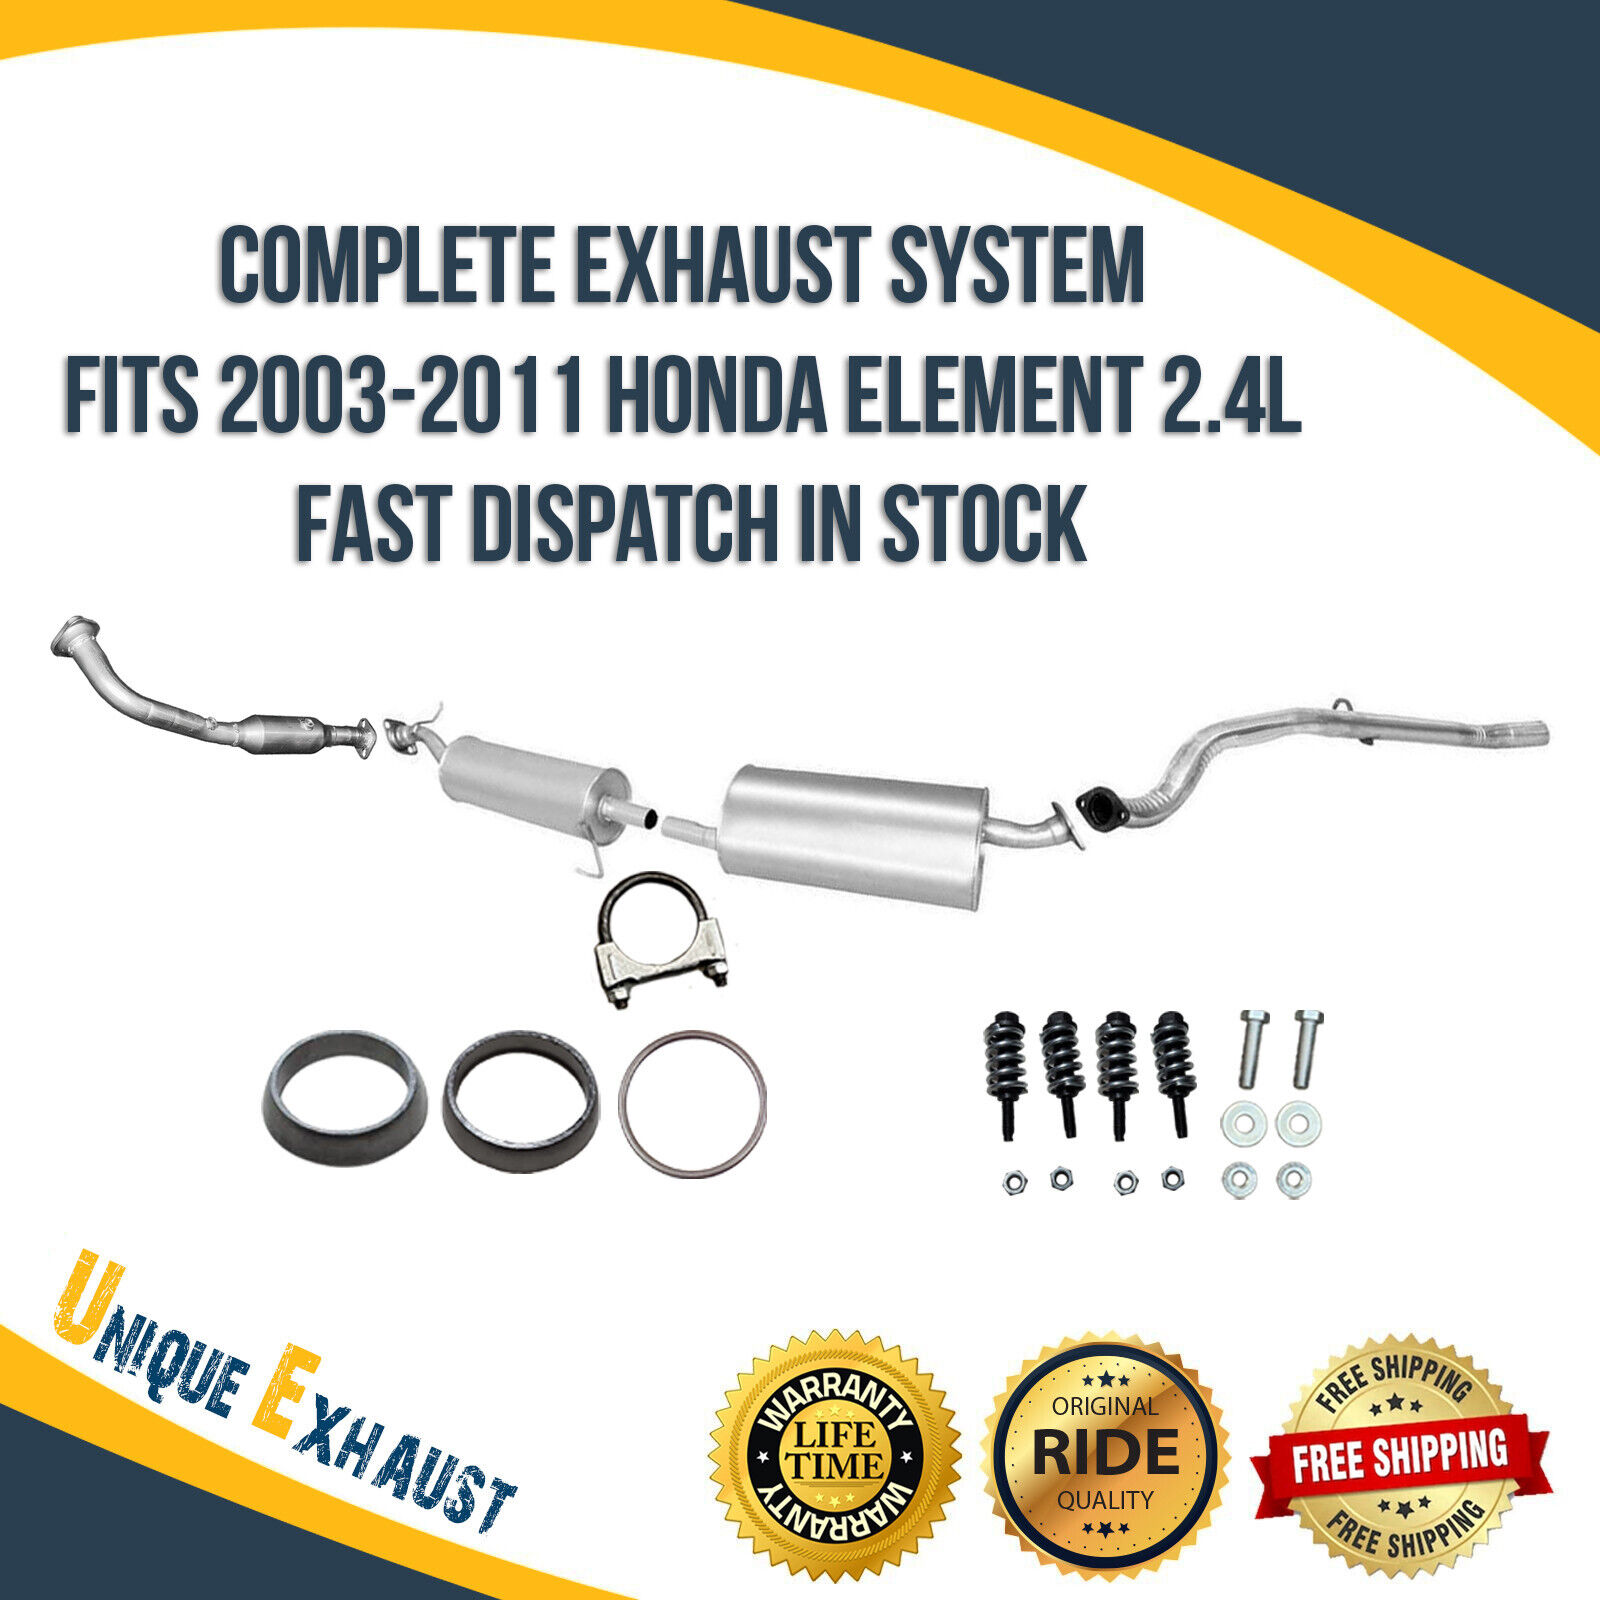 Complete Exhaust System Fits 2003-2011 Honda Element 2.4L Fast Dispatch In Stock